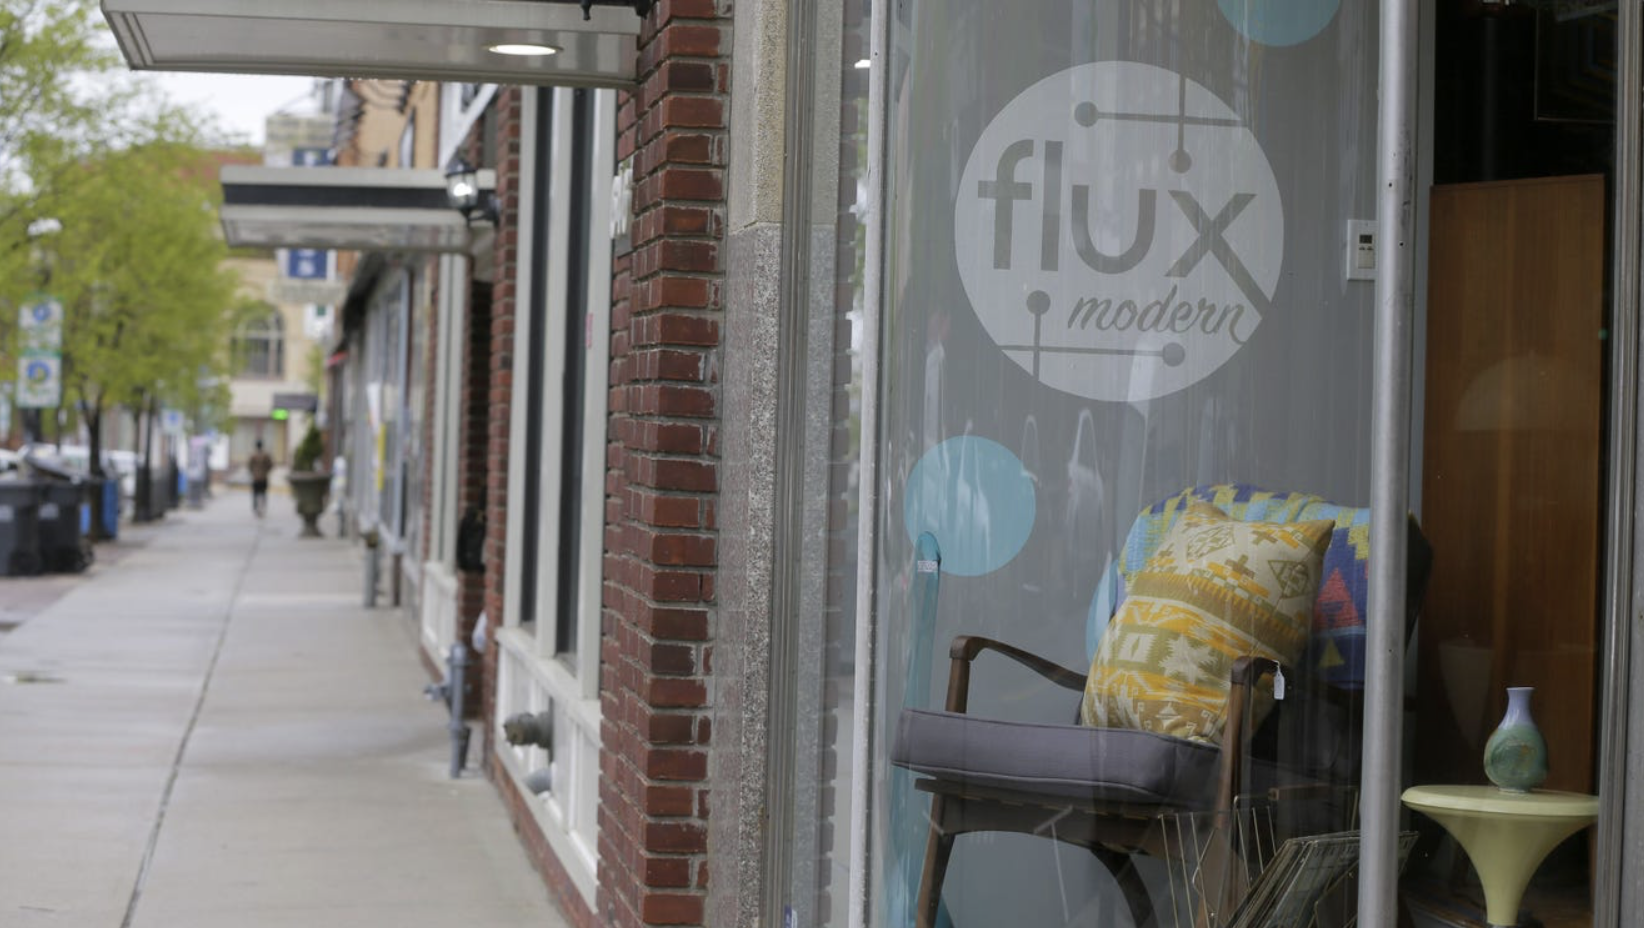  Danielle and Drew Levinson of Toms River, owners of Flux Modern, a mid-century modern and vintage shop, showcase some items for sale at the shop in Asbury Park, NJ Tuesday, May 3, 2016.   TANYA BREEN/STAFF PHOTOGRAPHER  